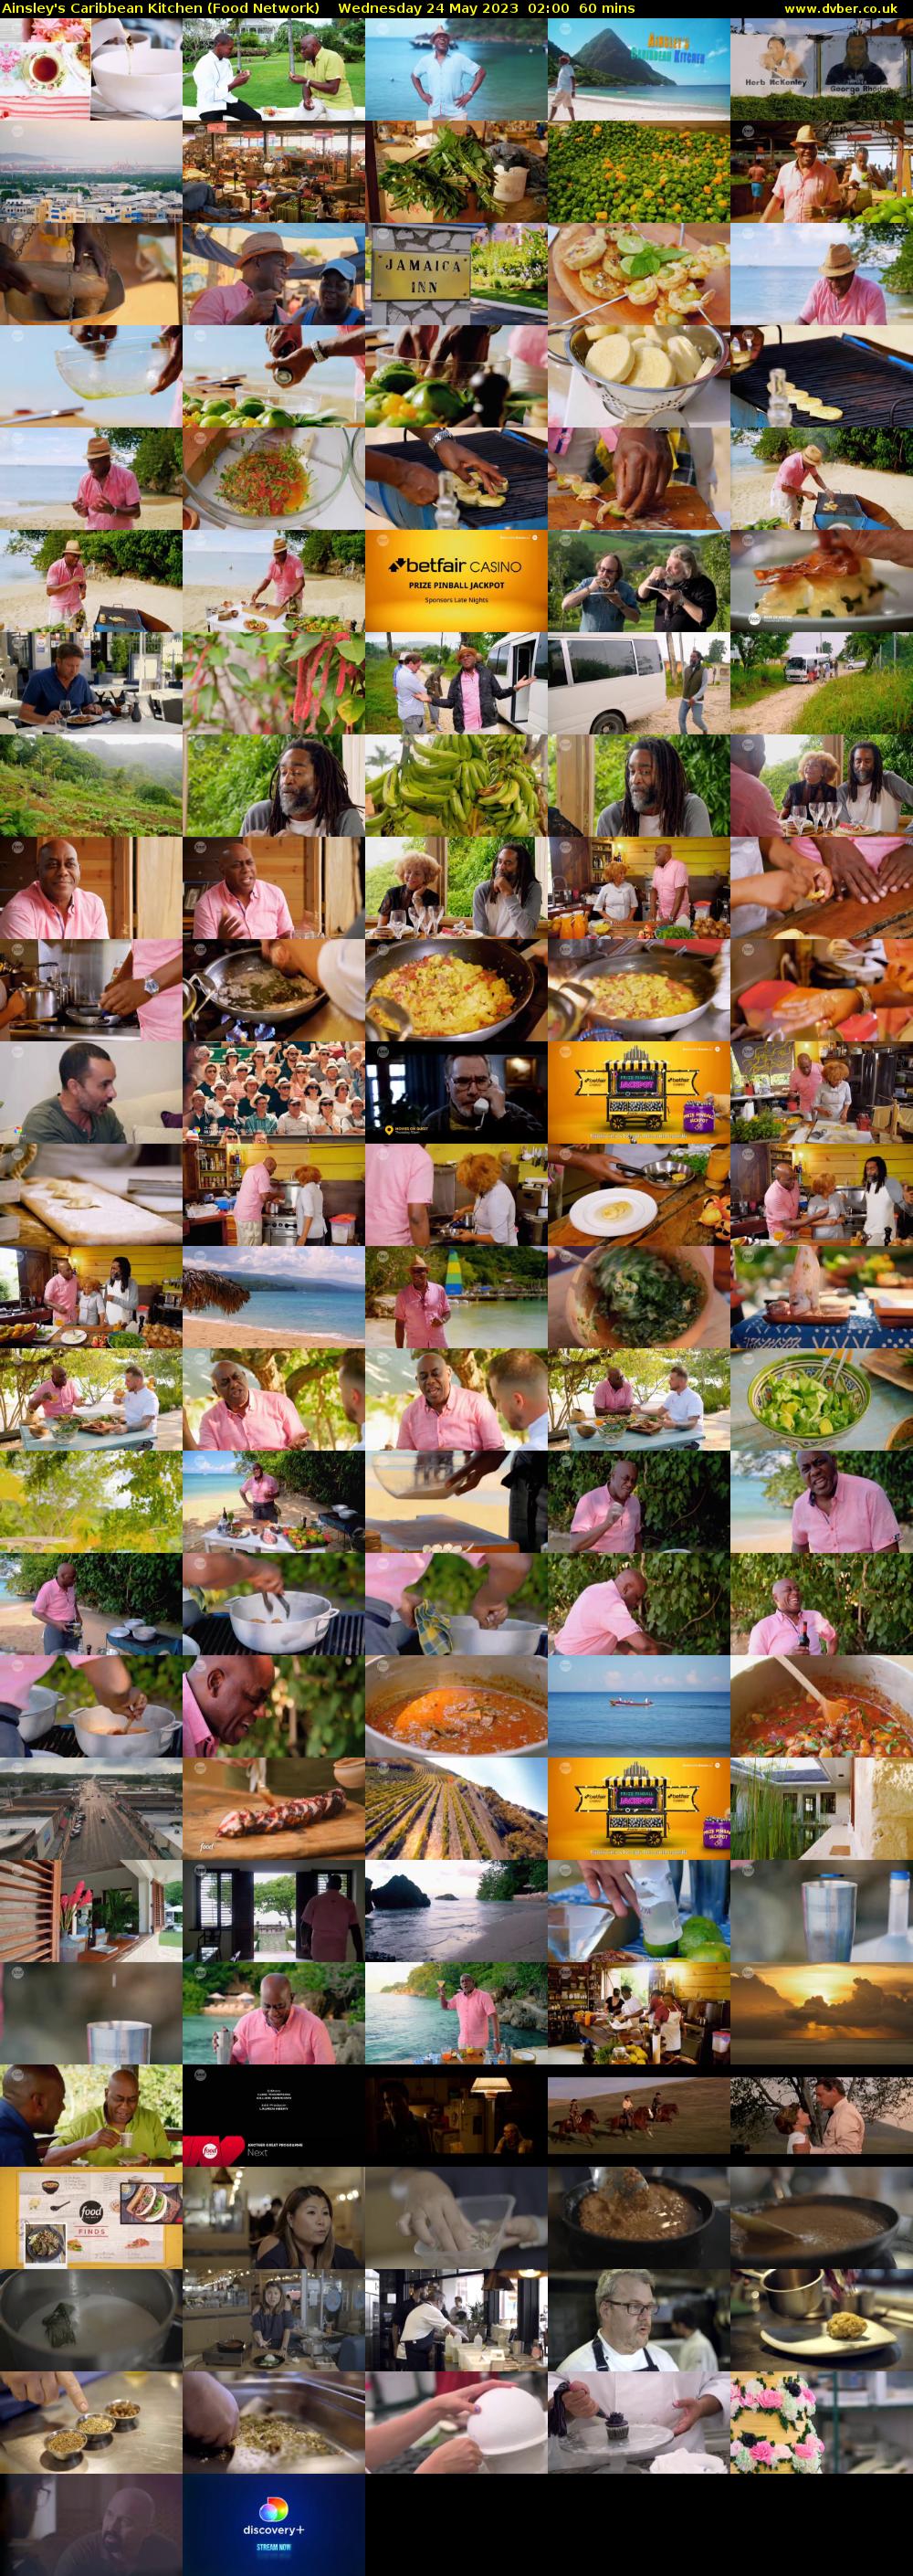 Ainsley's Caribbean Kitchen (Food Network) Wednesday 24 May 2023 02:00 - 03:00